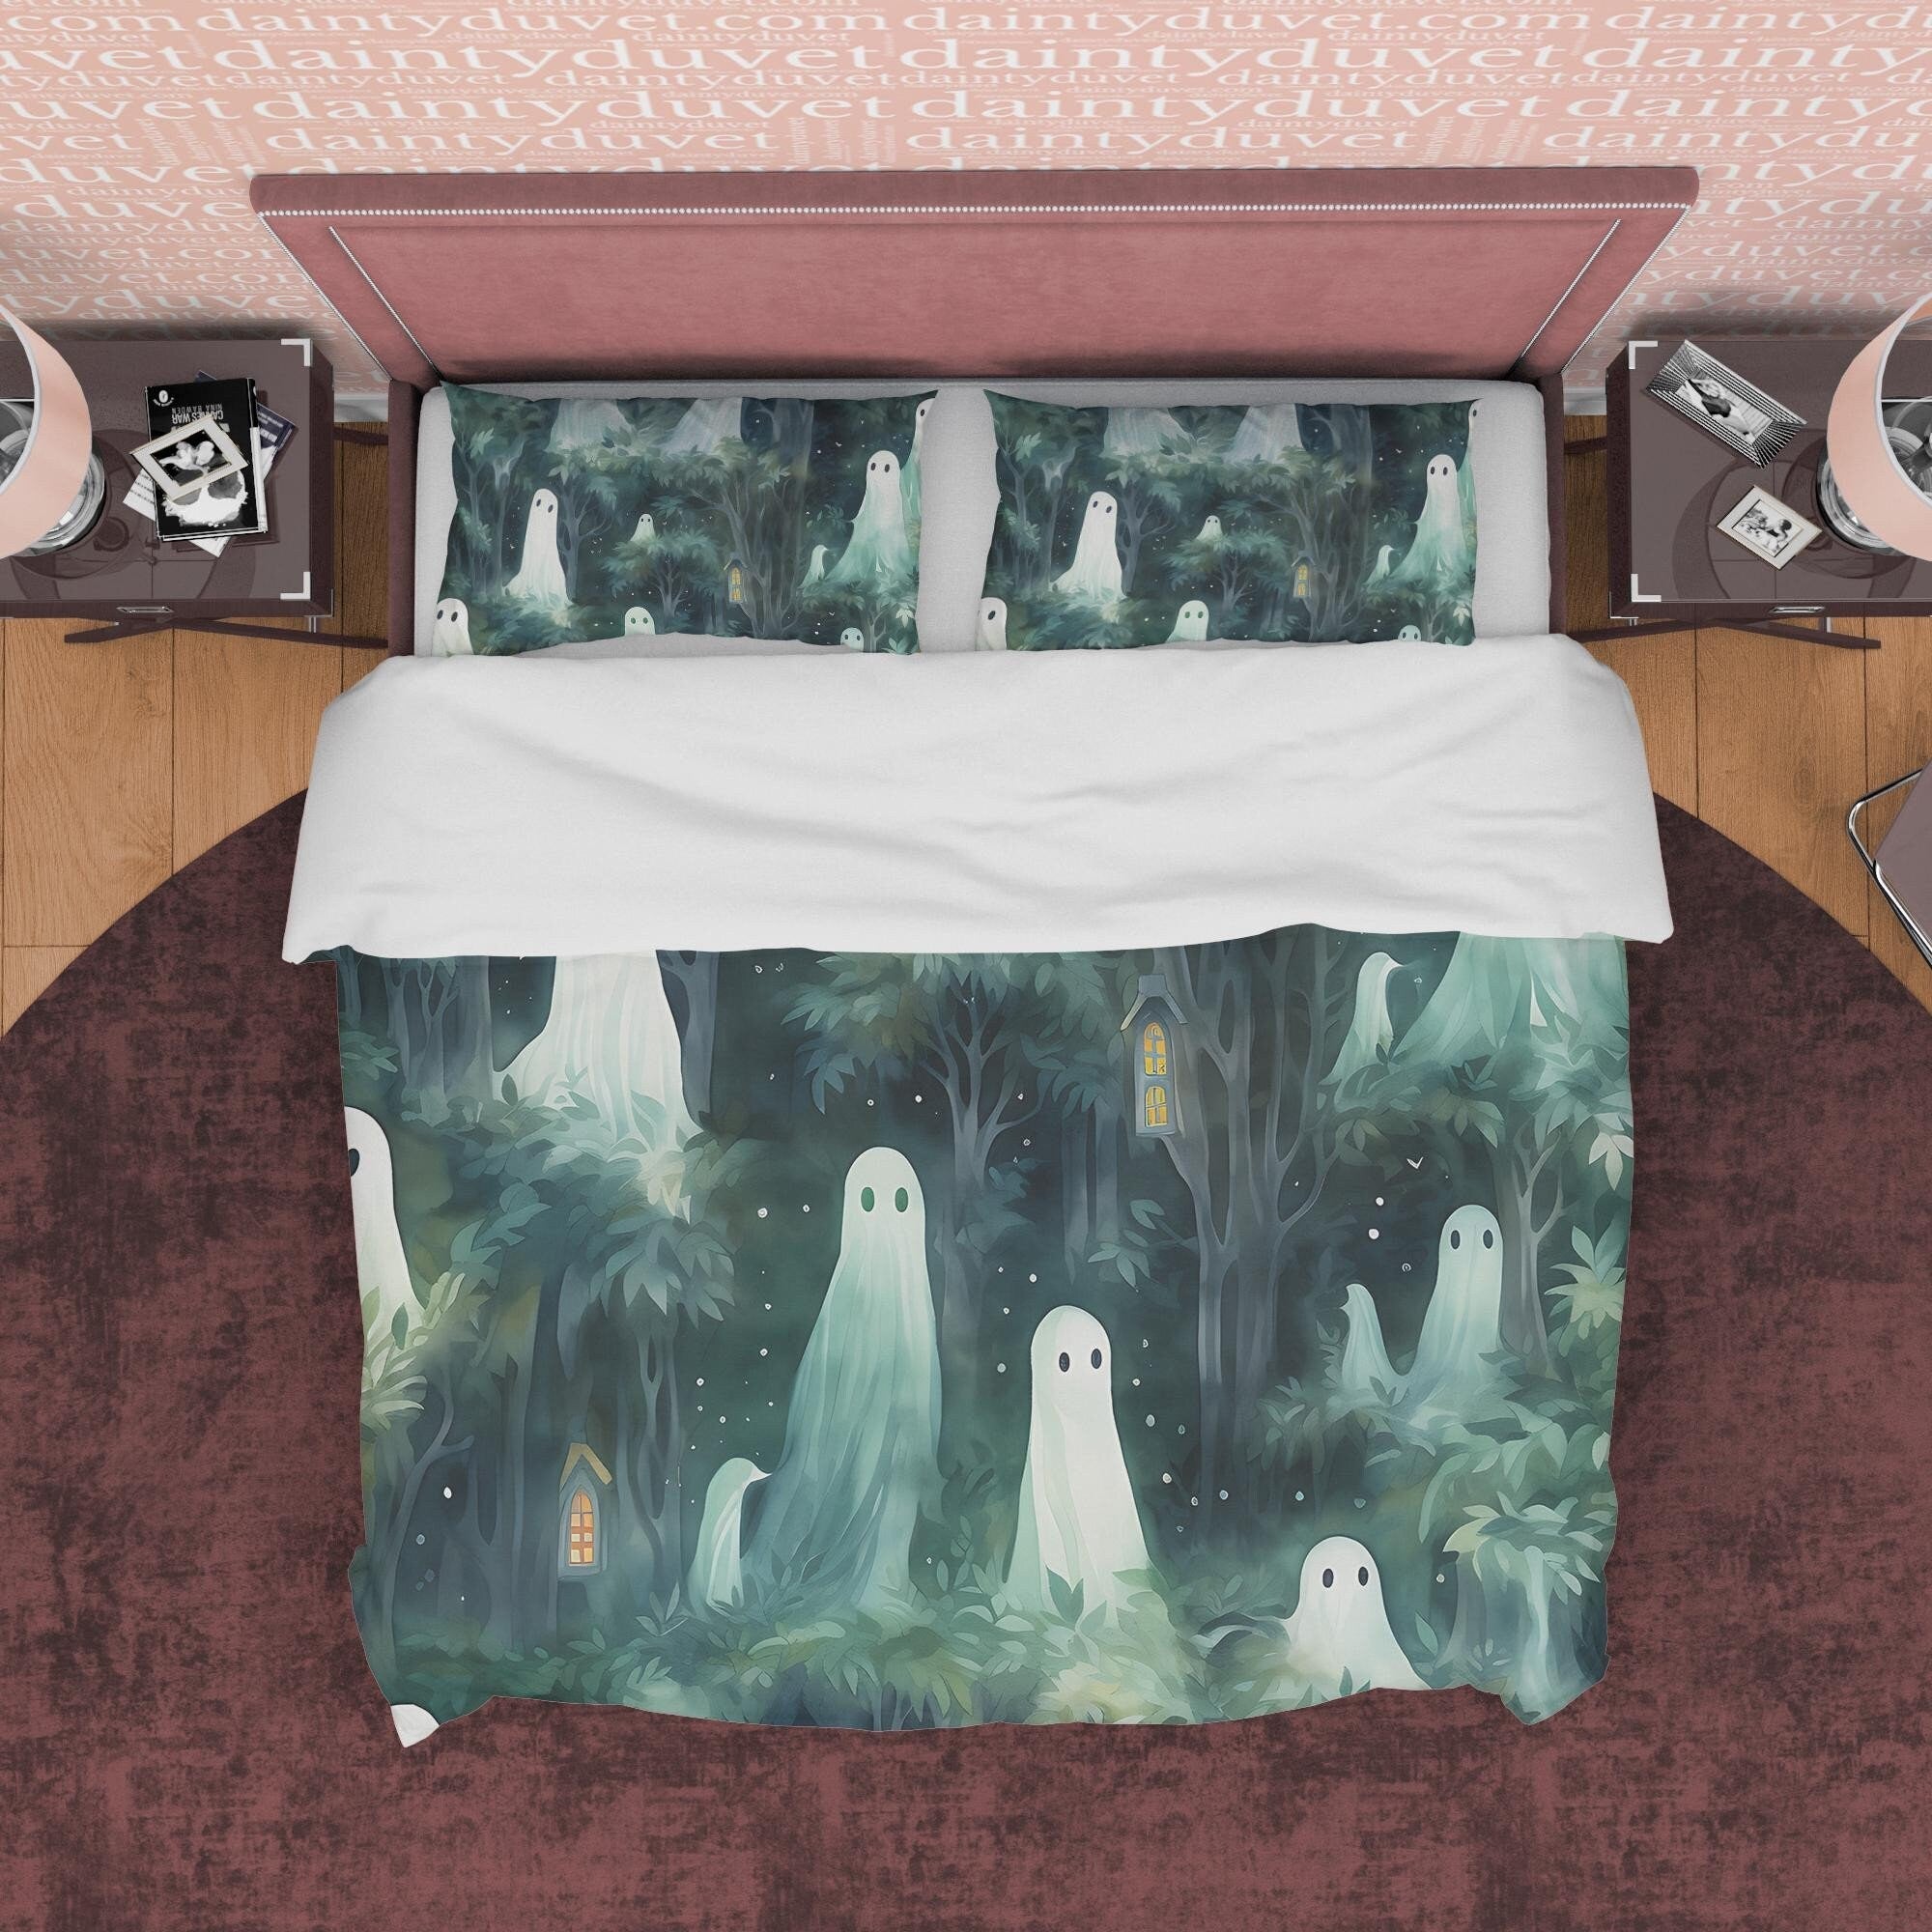 Enchanted Forest Duvet Cover Set, Ghost Quilt Cover Aesthetic Zipper Bedding, Halloween Room Decor, Haunted Midnight Blanket Cover